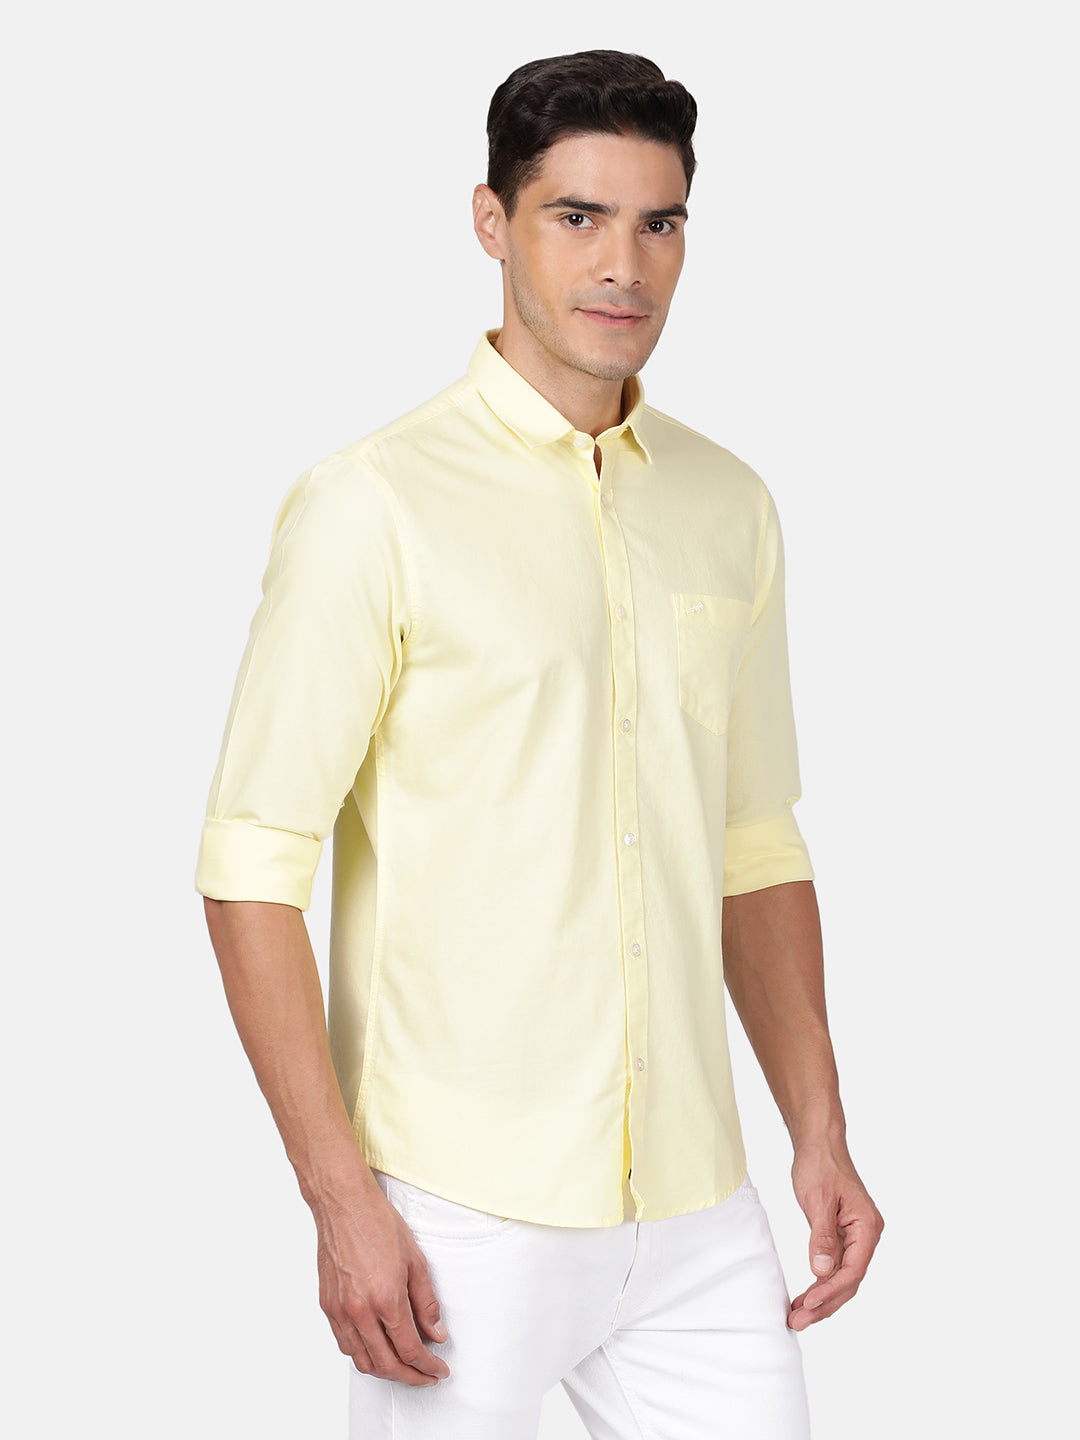 Crocodile Casual Full Sleeve Slim Fit Solid Yellow with Collar Shirt for Men